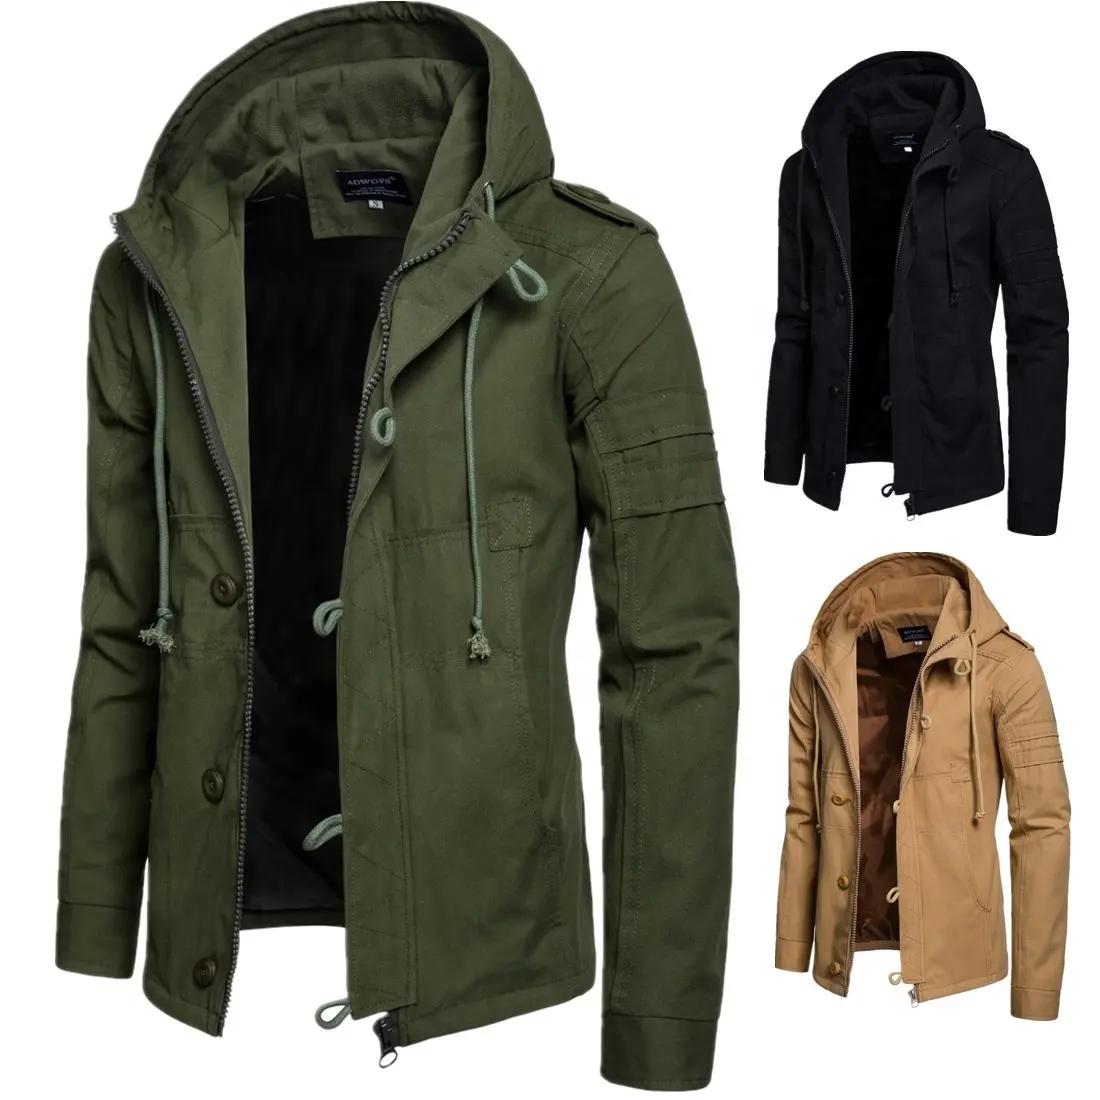 Trendy Mens Hoodie Clothing Warm Coats Fitted Hoodies Winter Jackets Plus Size Men's Jackets